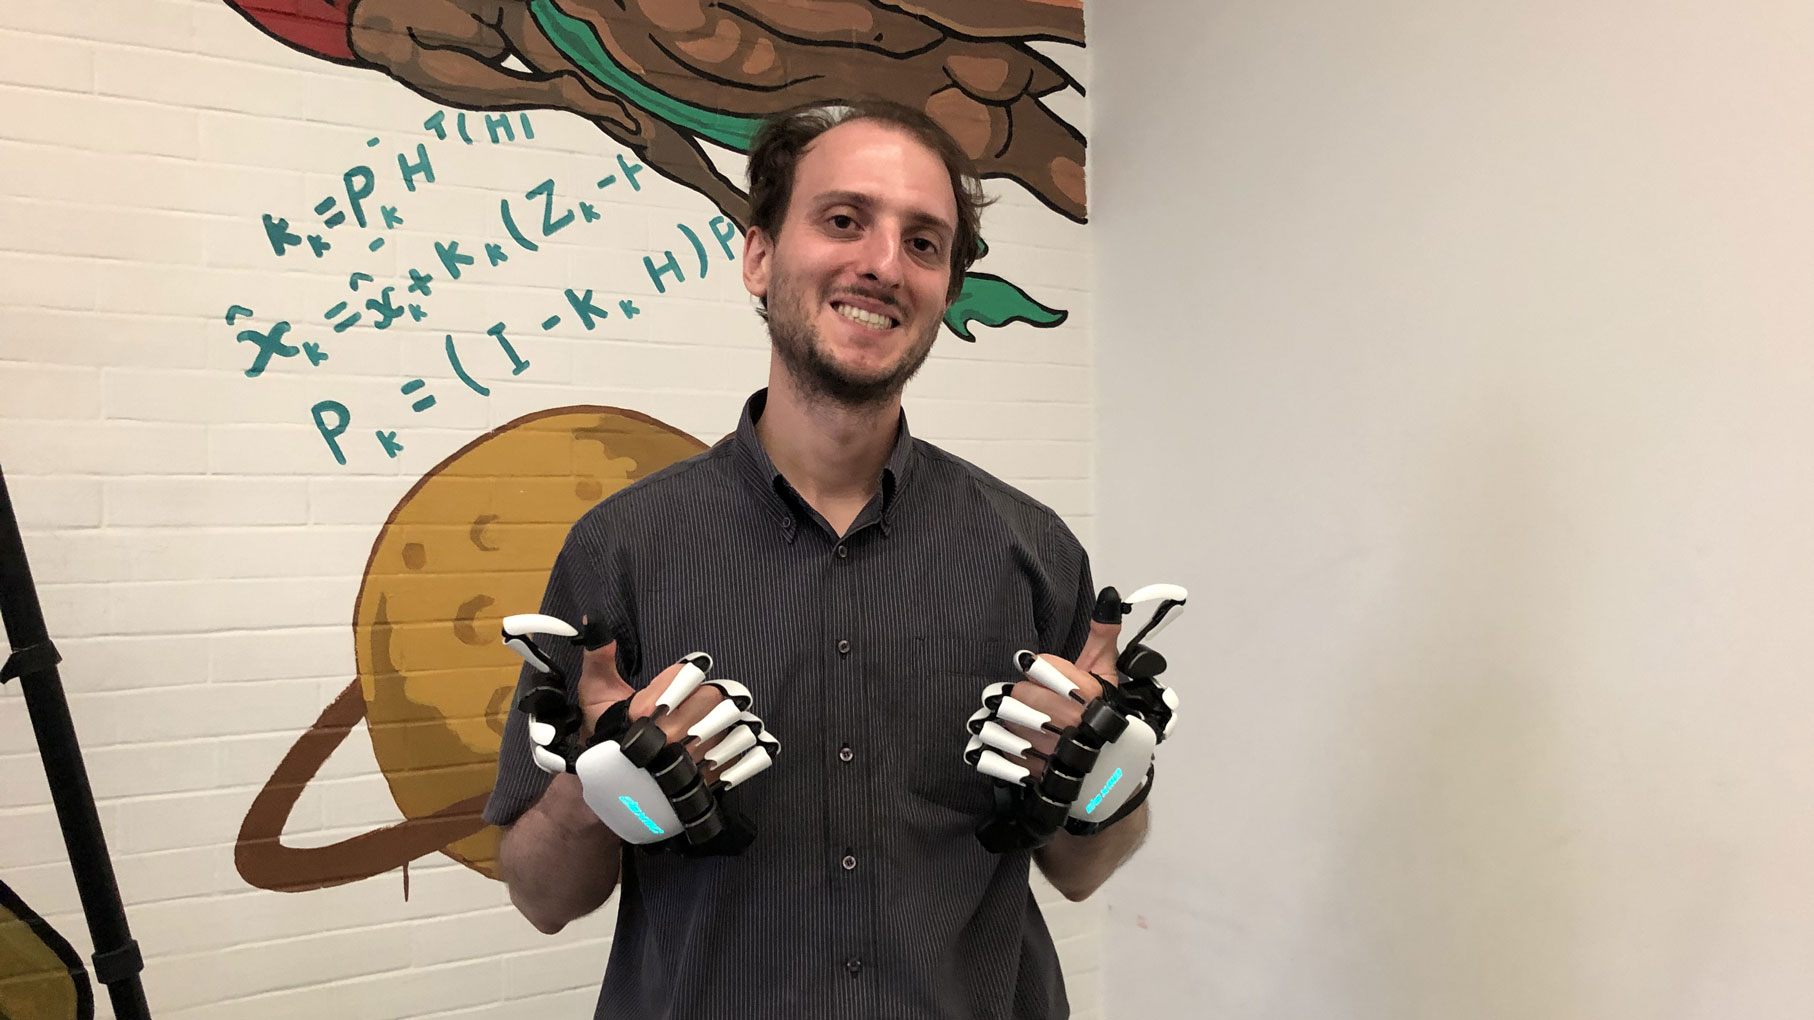 Dexmo force feedback gloves show the future of hands presence in VR